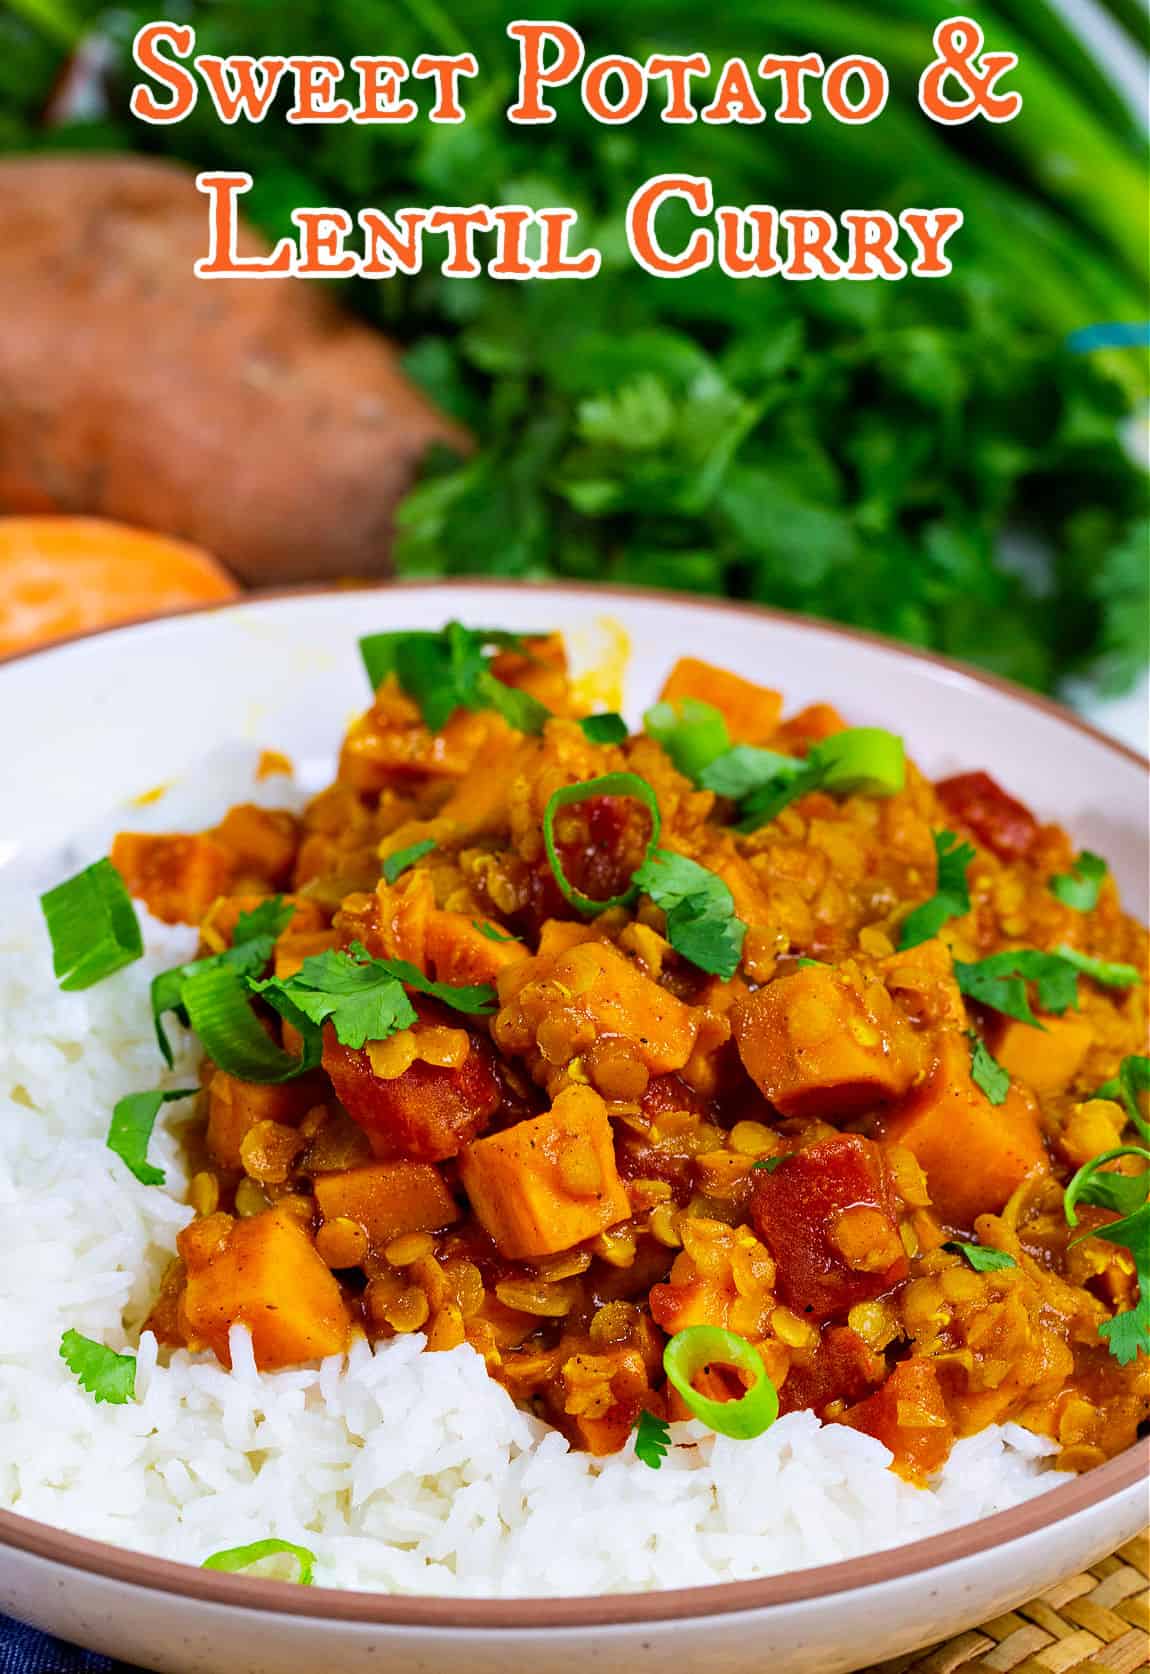 Sweet Potato Curry over white rice.